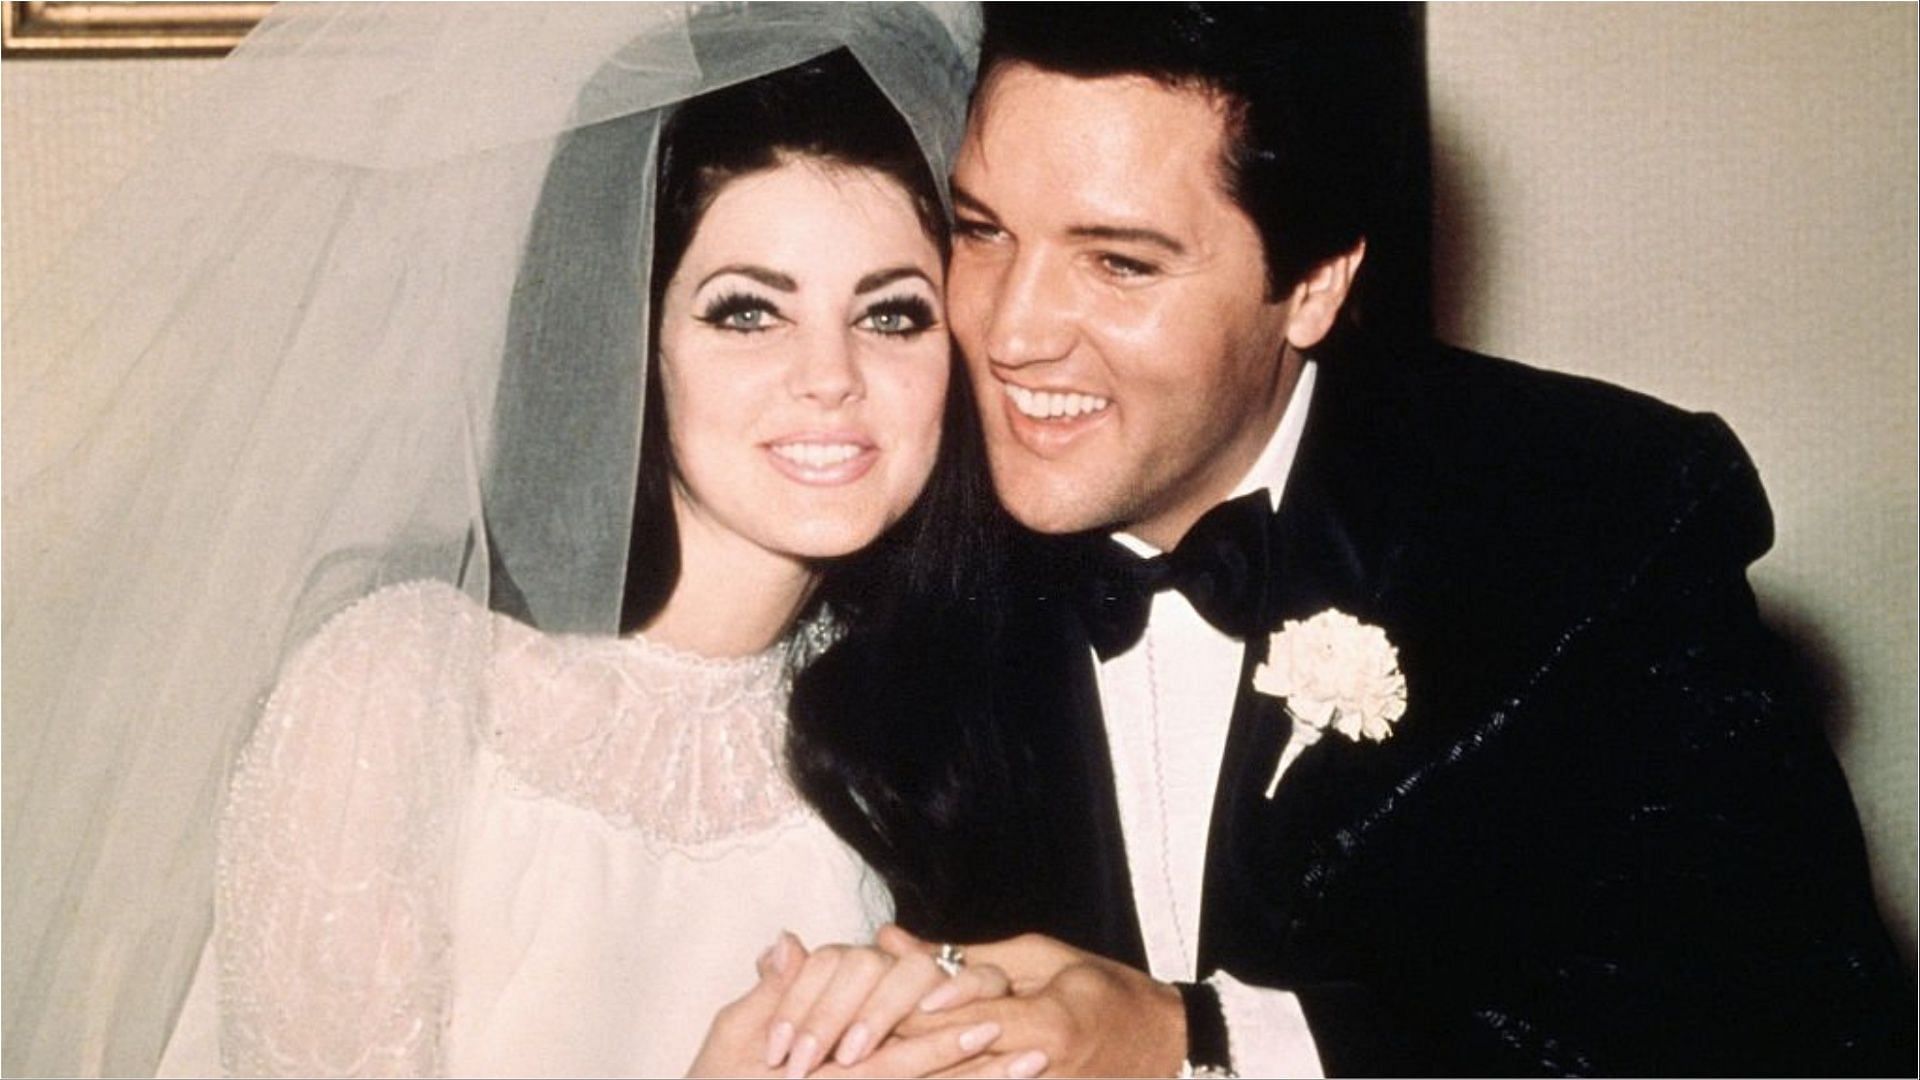 Elvis Presley and Priscilla Presley&#039;s relationship will be featured in an upcoming biographical film (Image via Getty Images)